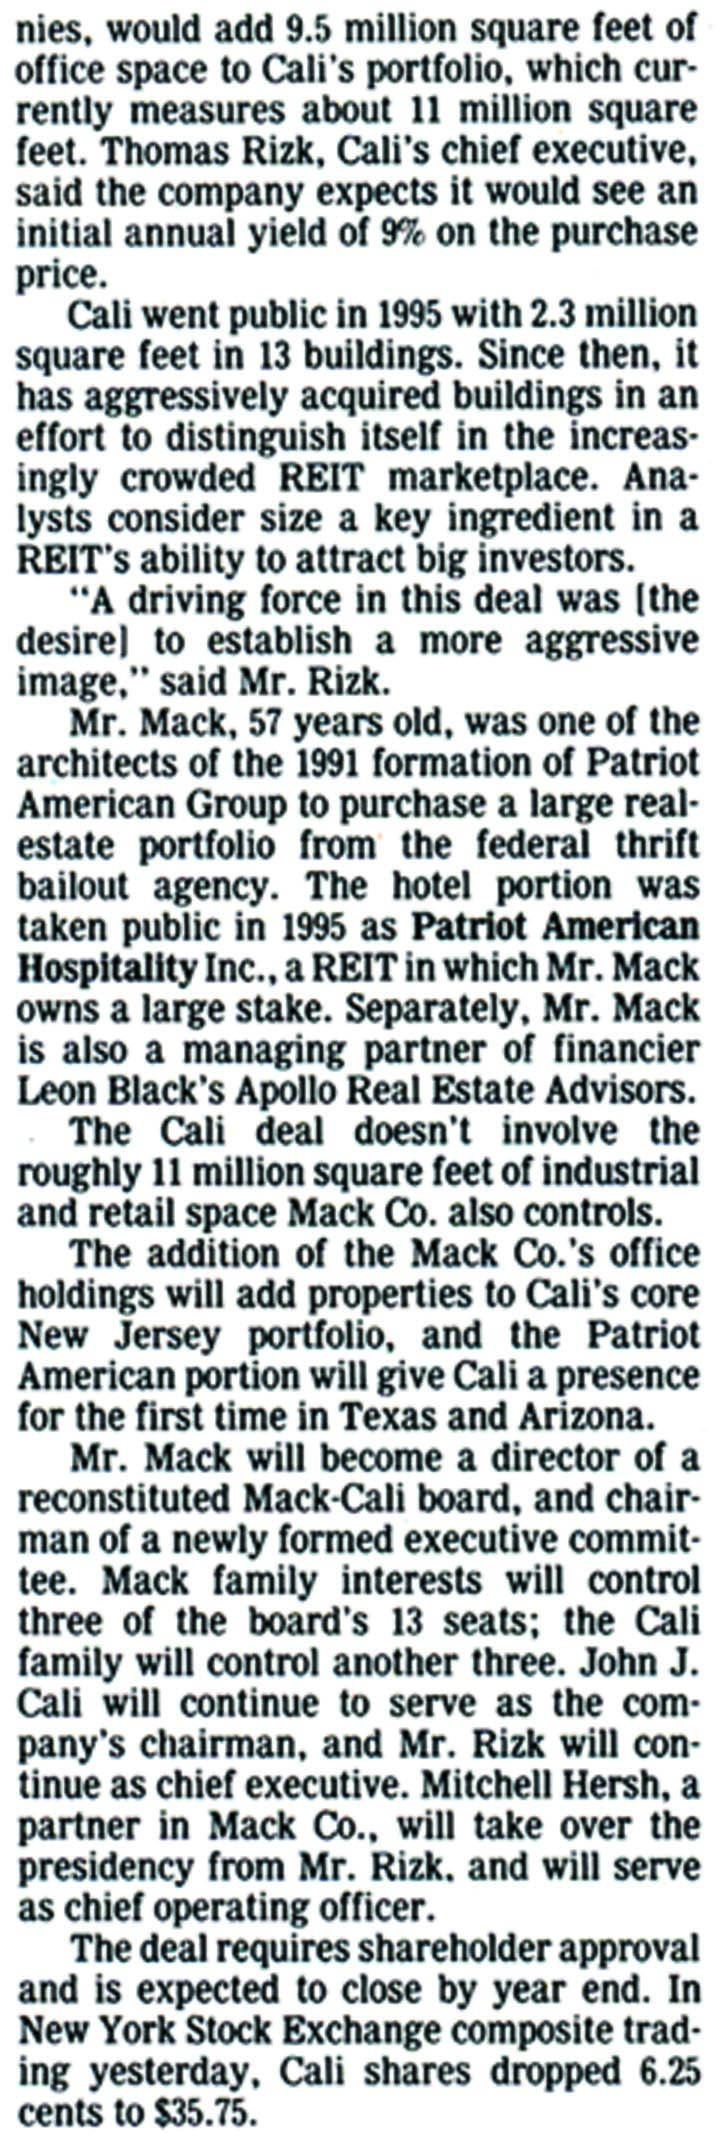 Cali-Realty-Agrees-to-Pay-900-Million-To-Acquire-55-Mack-Co.-Office-Buildings-Column-2